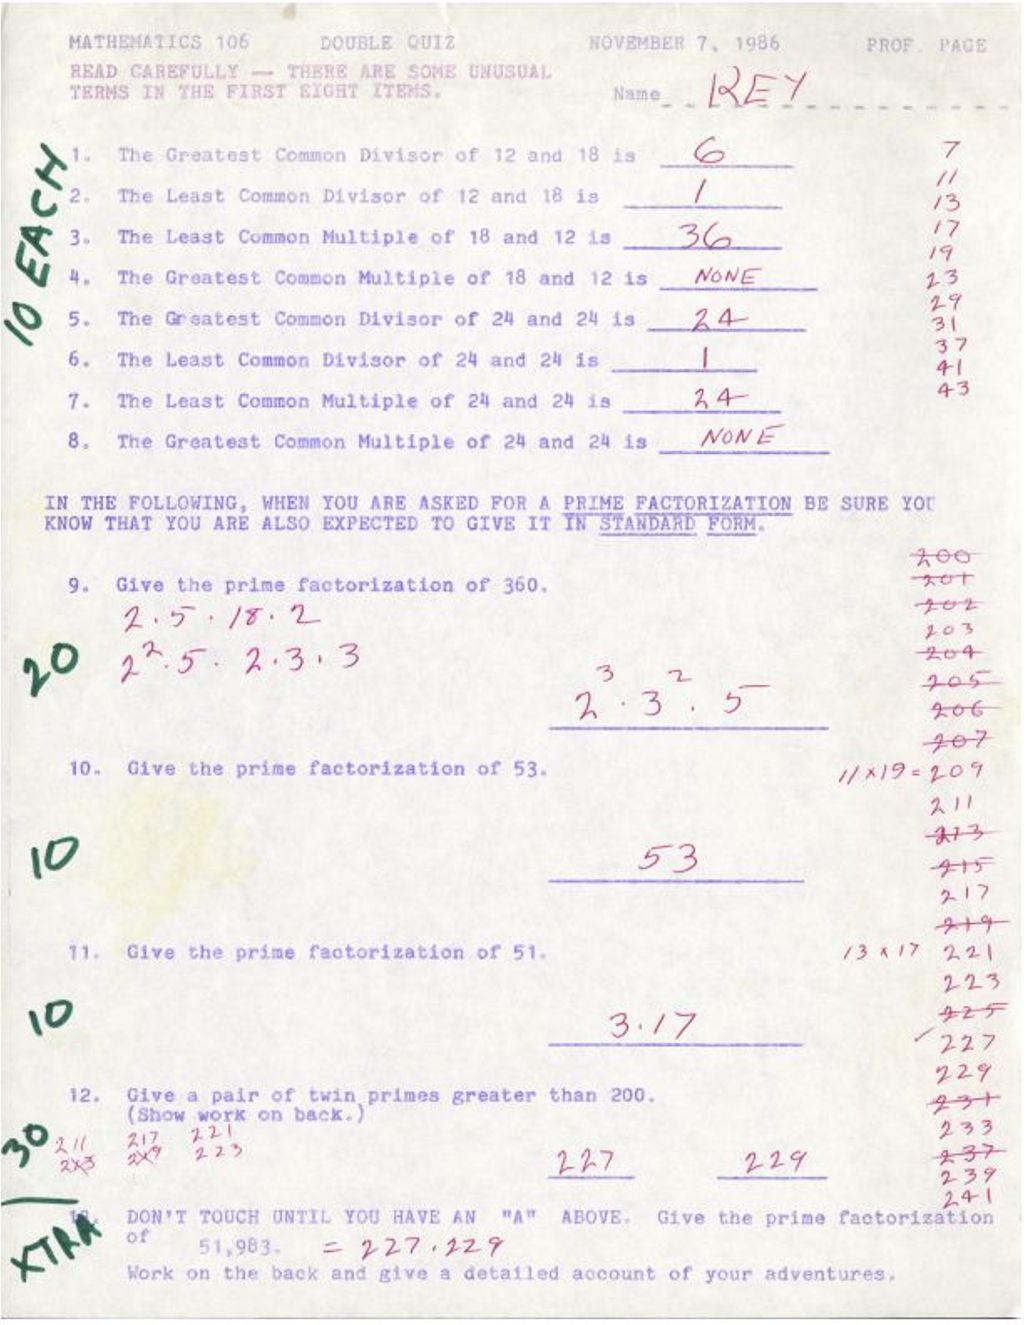 Miniature of Math 106 Double Quiz “The Greatest Common Divisor” with AK and grading notes handwritten by DP